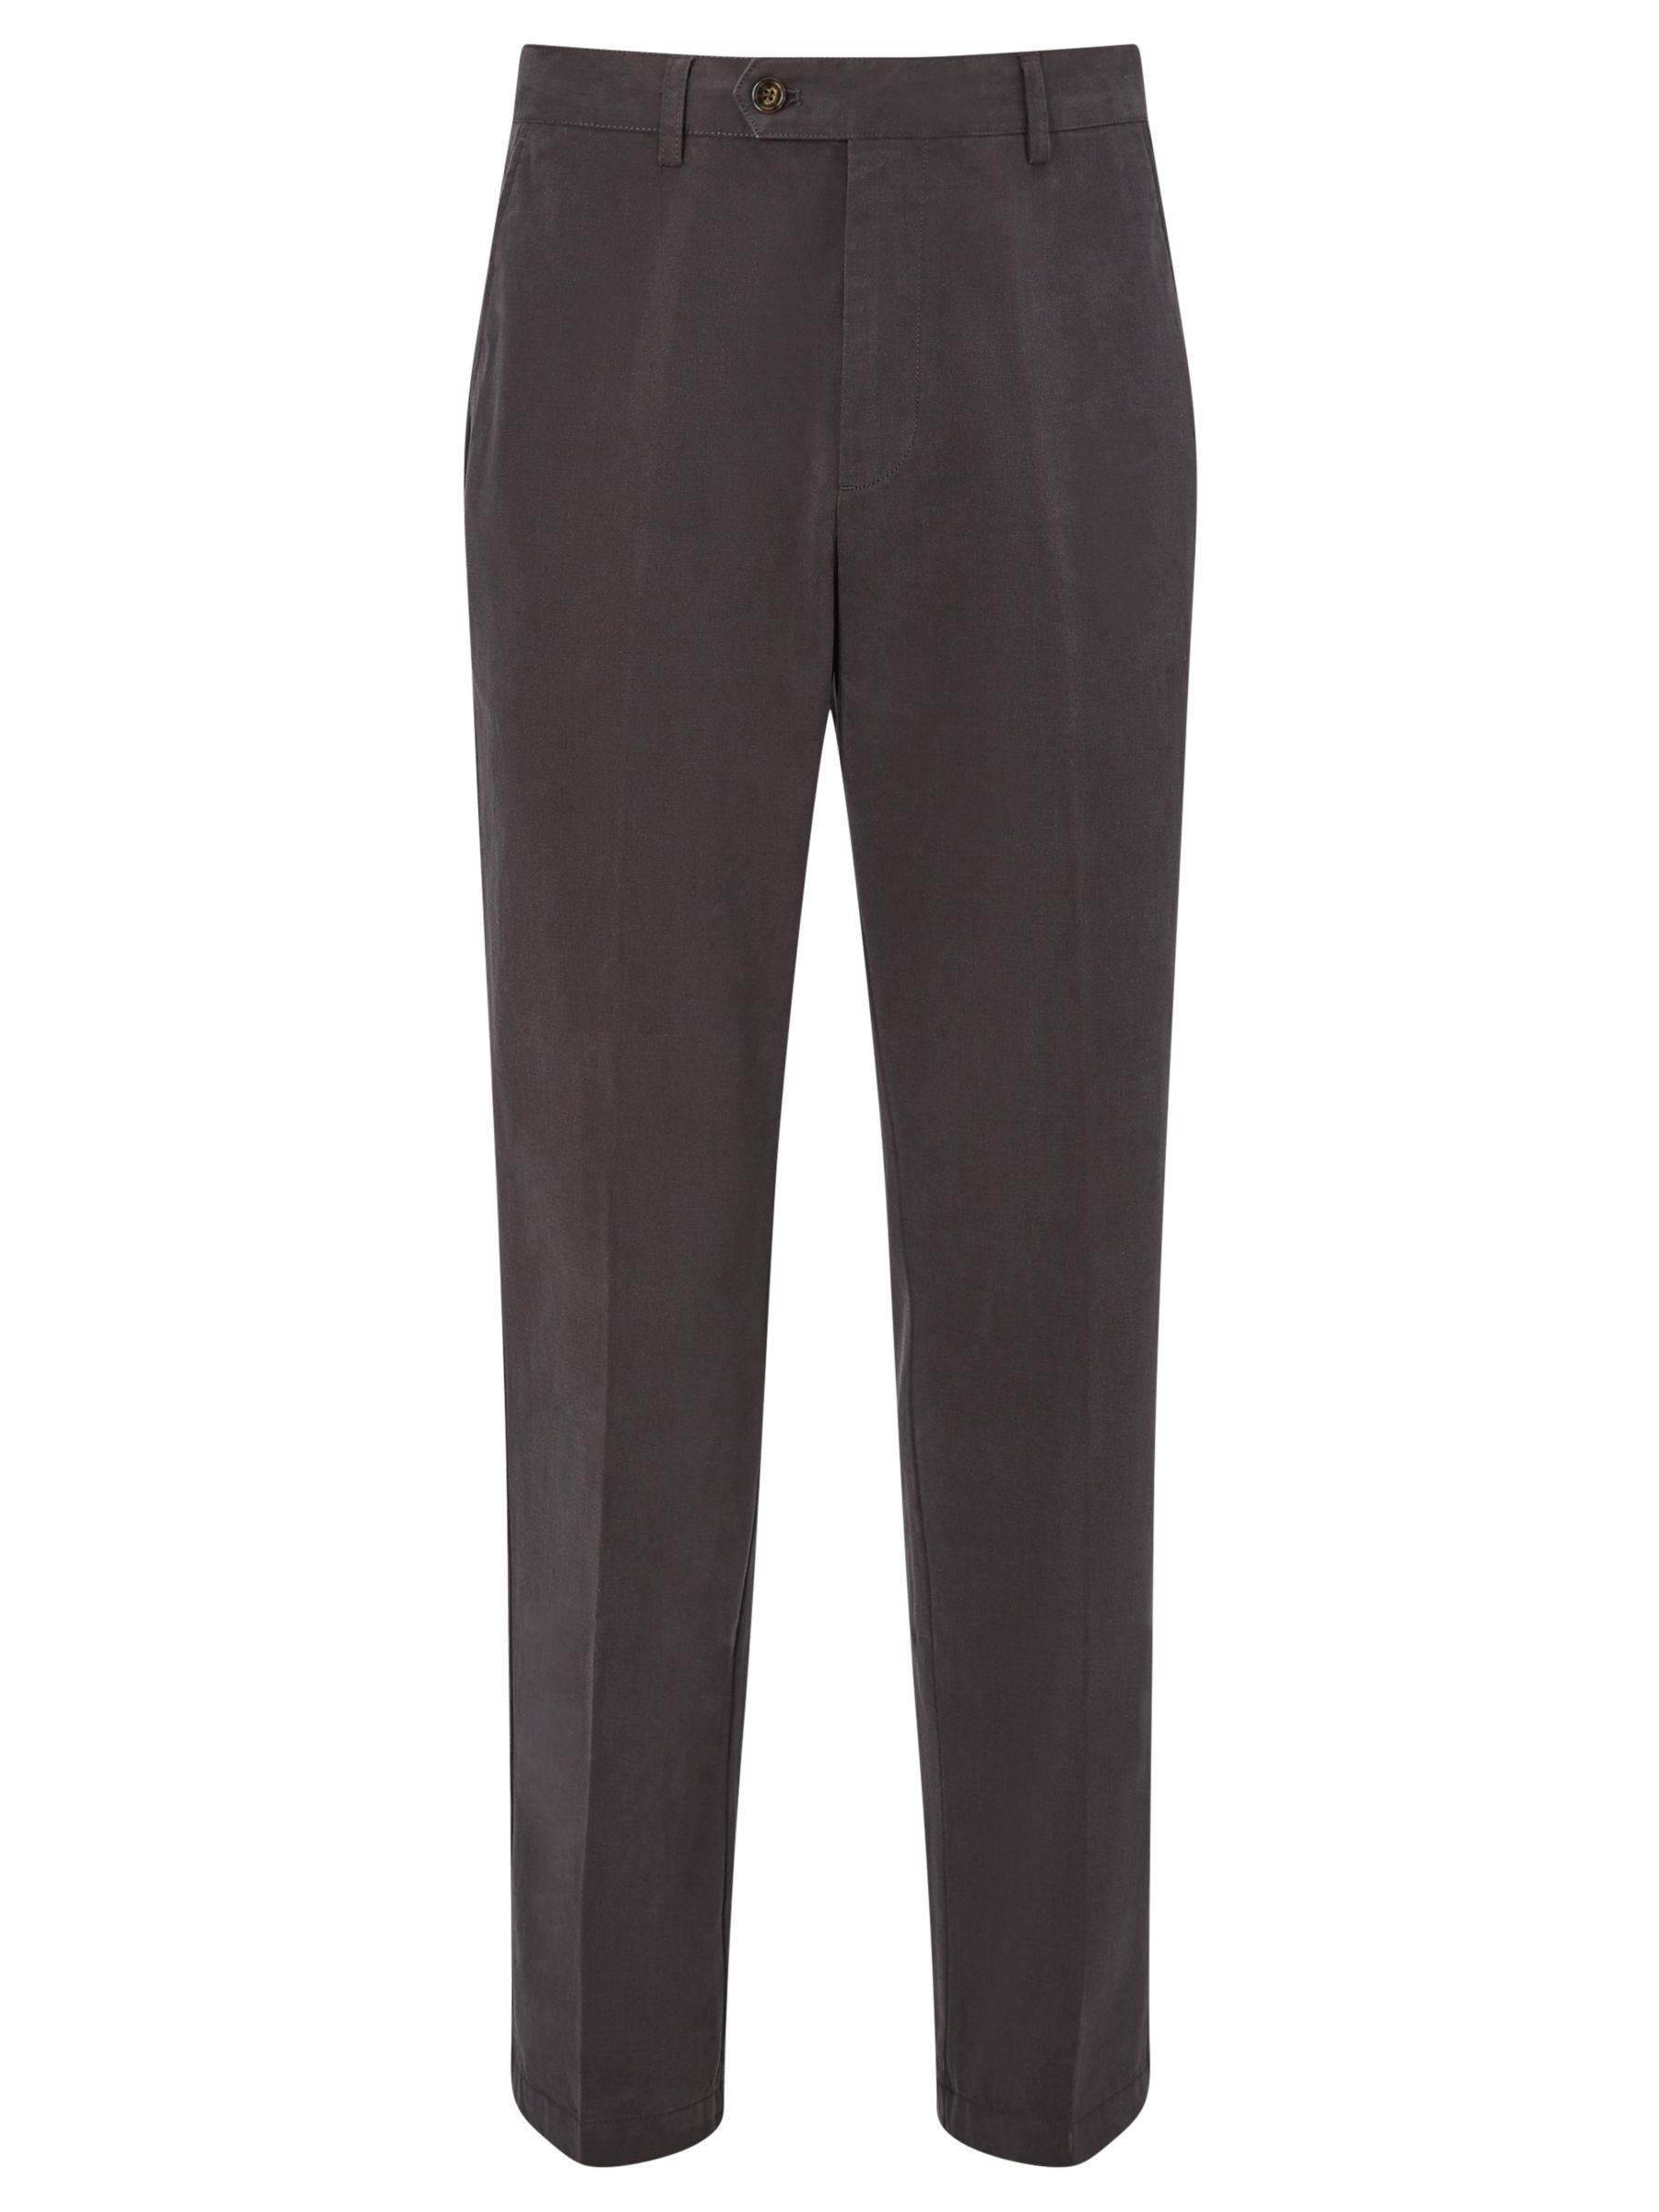 John Lewis & Partners Wrinkle Free Flat Front Trousers, Grey, 34R